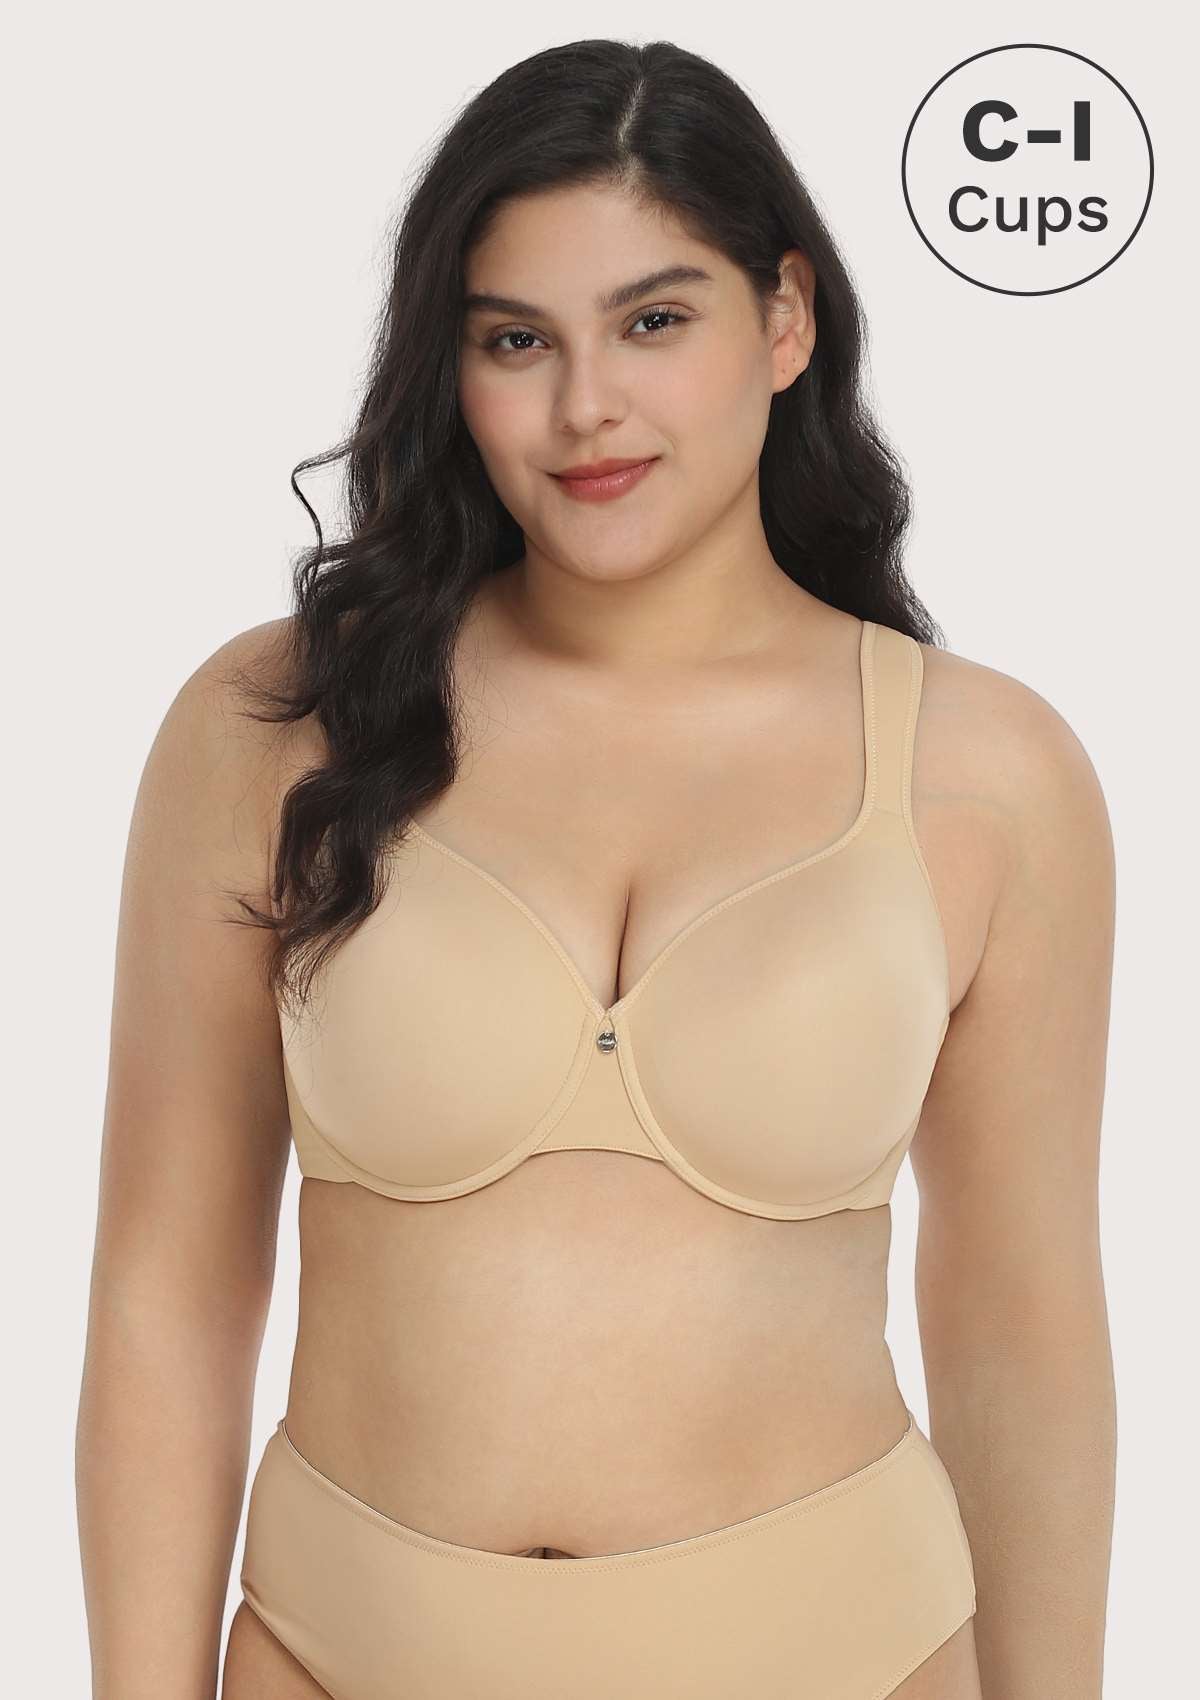 HSIA Patricia Seamless Lightly Padded Minimizer Bra -for Bigger Busts - Beige / 34 / DDD/F